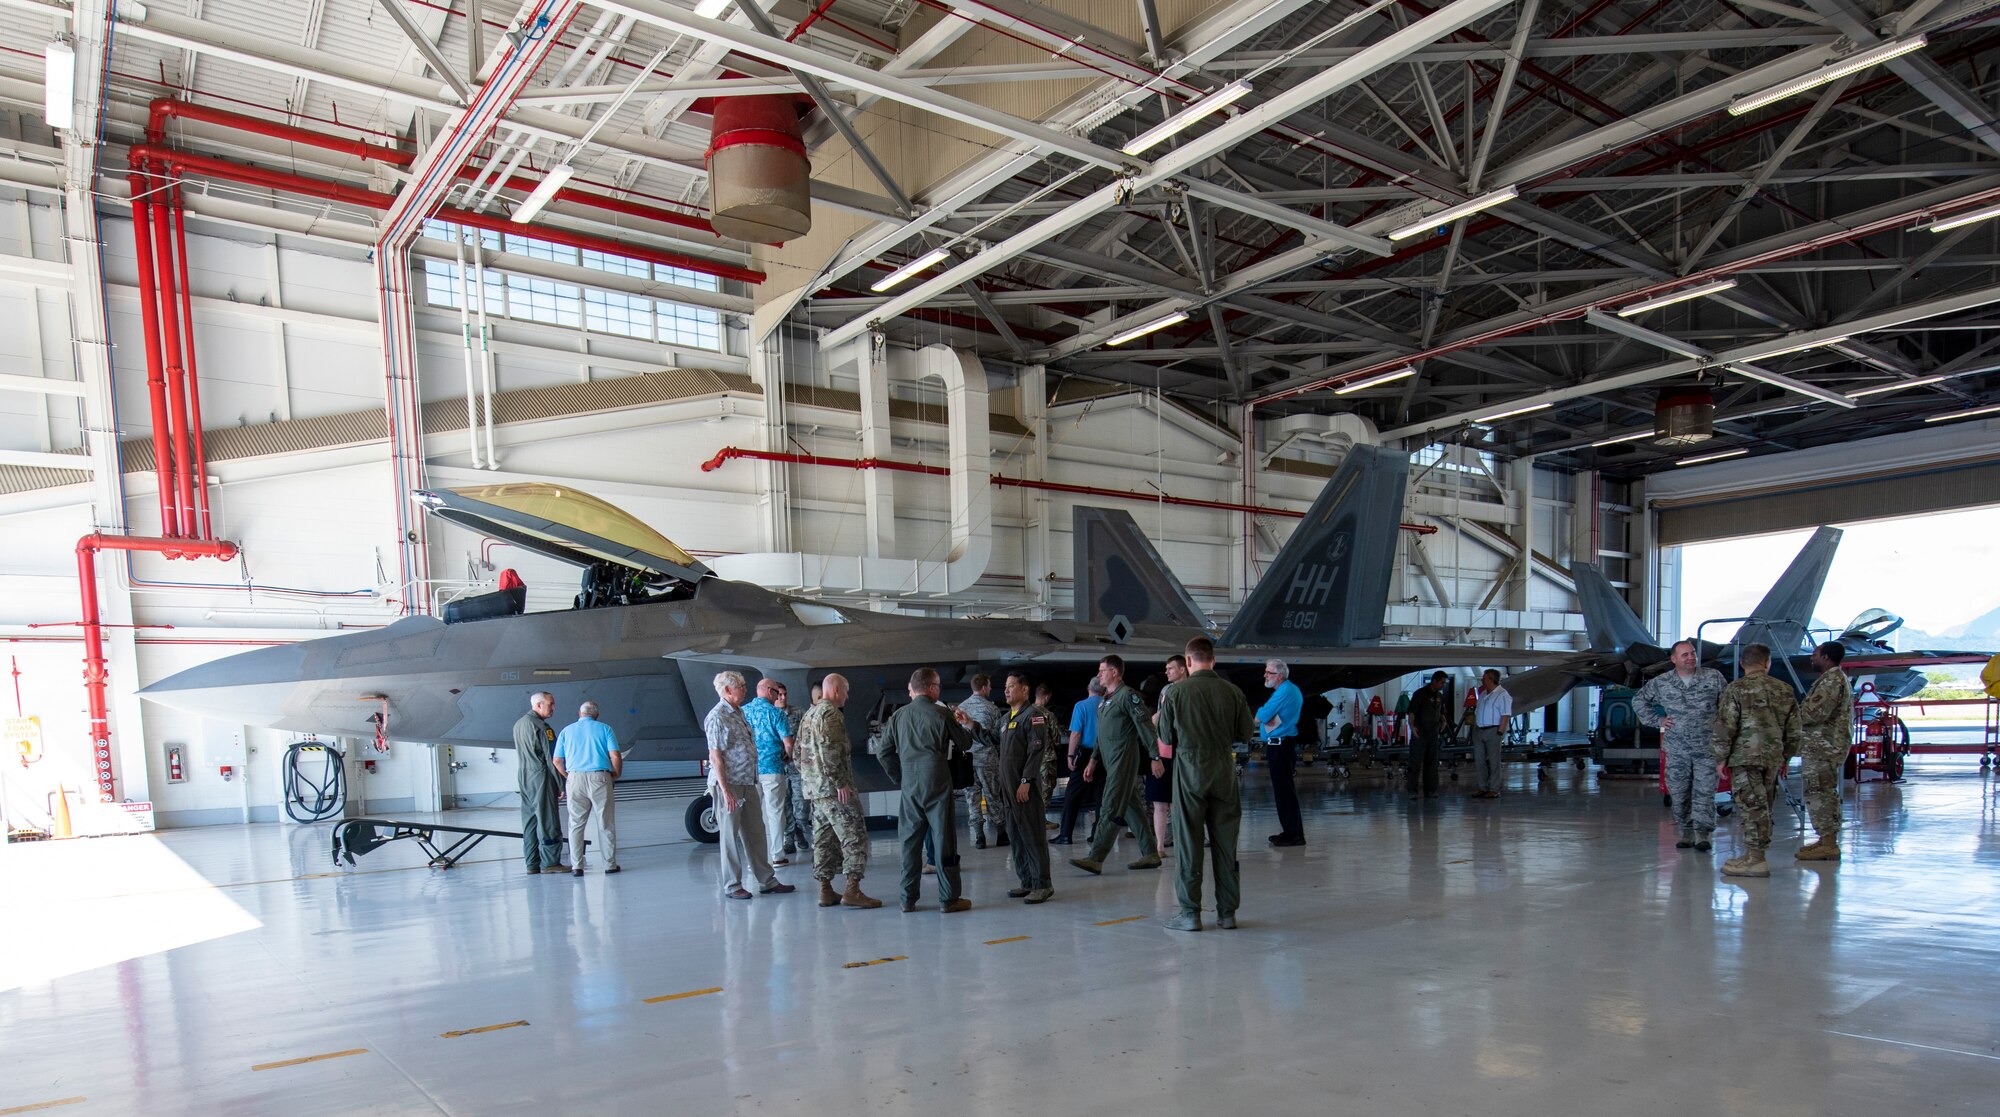 Members of the National Commission on Military Aviation Safety (NCMAS) take a tour of the F-22 Raptor facility Nov. 1, 2019, at Joint Base Pearl Harbor-Hickam. The purpose of NCMAS is to examine past mishaps and make recommendations to the President, Congress and ultimately the Defense Department on ways to improve aviation safety and readiness in the military. As part of their review, members of NCMAS conducted site visits of various flight facilities and operations located on Oahu island. (U.S. Air National Guard photo by Tech. Sgt. Alison Bruce-Maldonado)